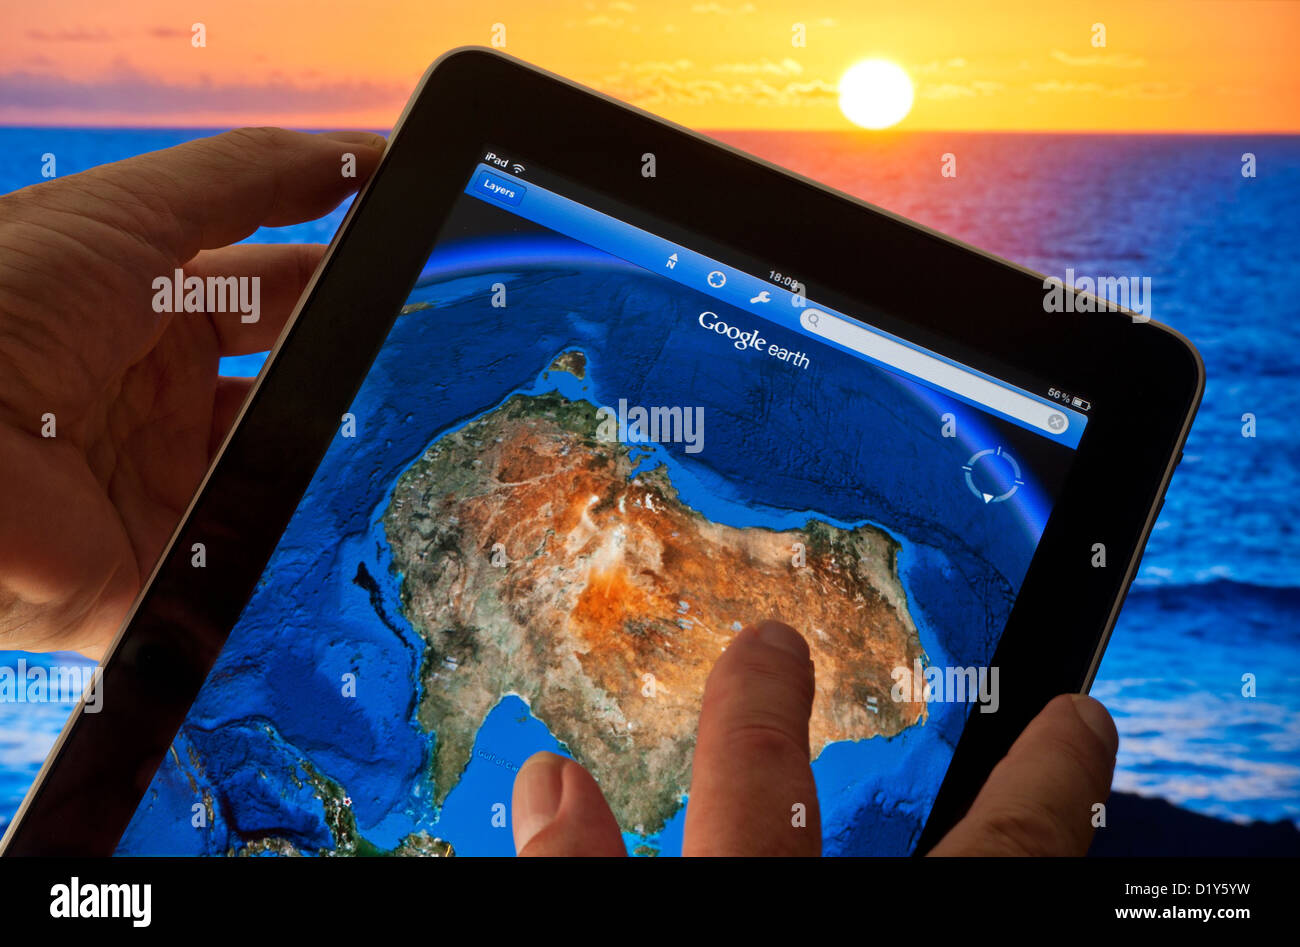 iPad GOOGLE EARTH AUSTRALIA Hands holding Apple iPad smart tablet Ocean contour on screen featuring map of Australia Southern Pacific & Indian Oceans Stock Photo